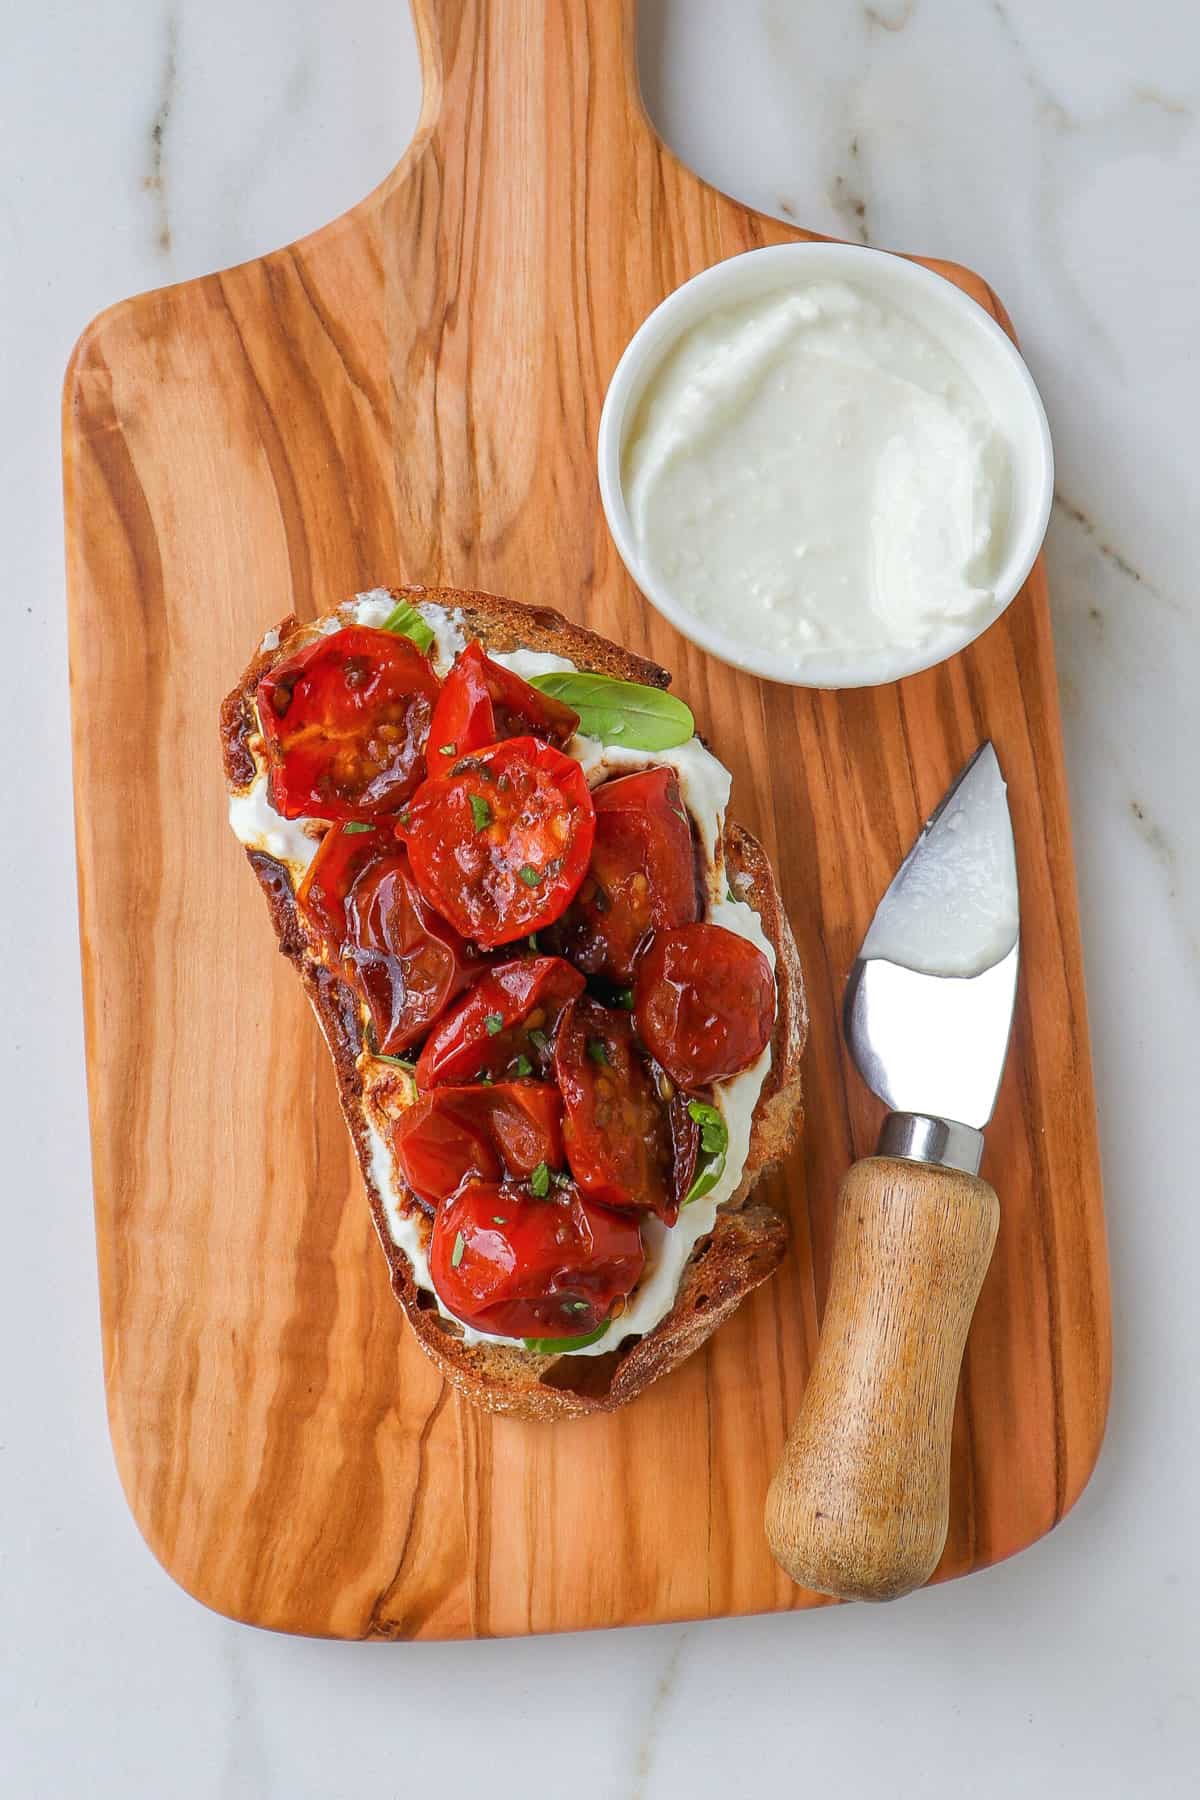 Slice of toast with tomatoes on wooden board.